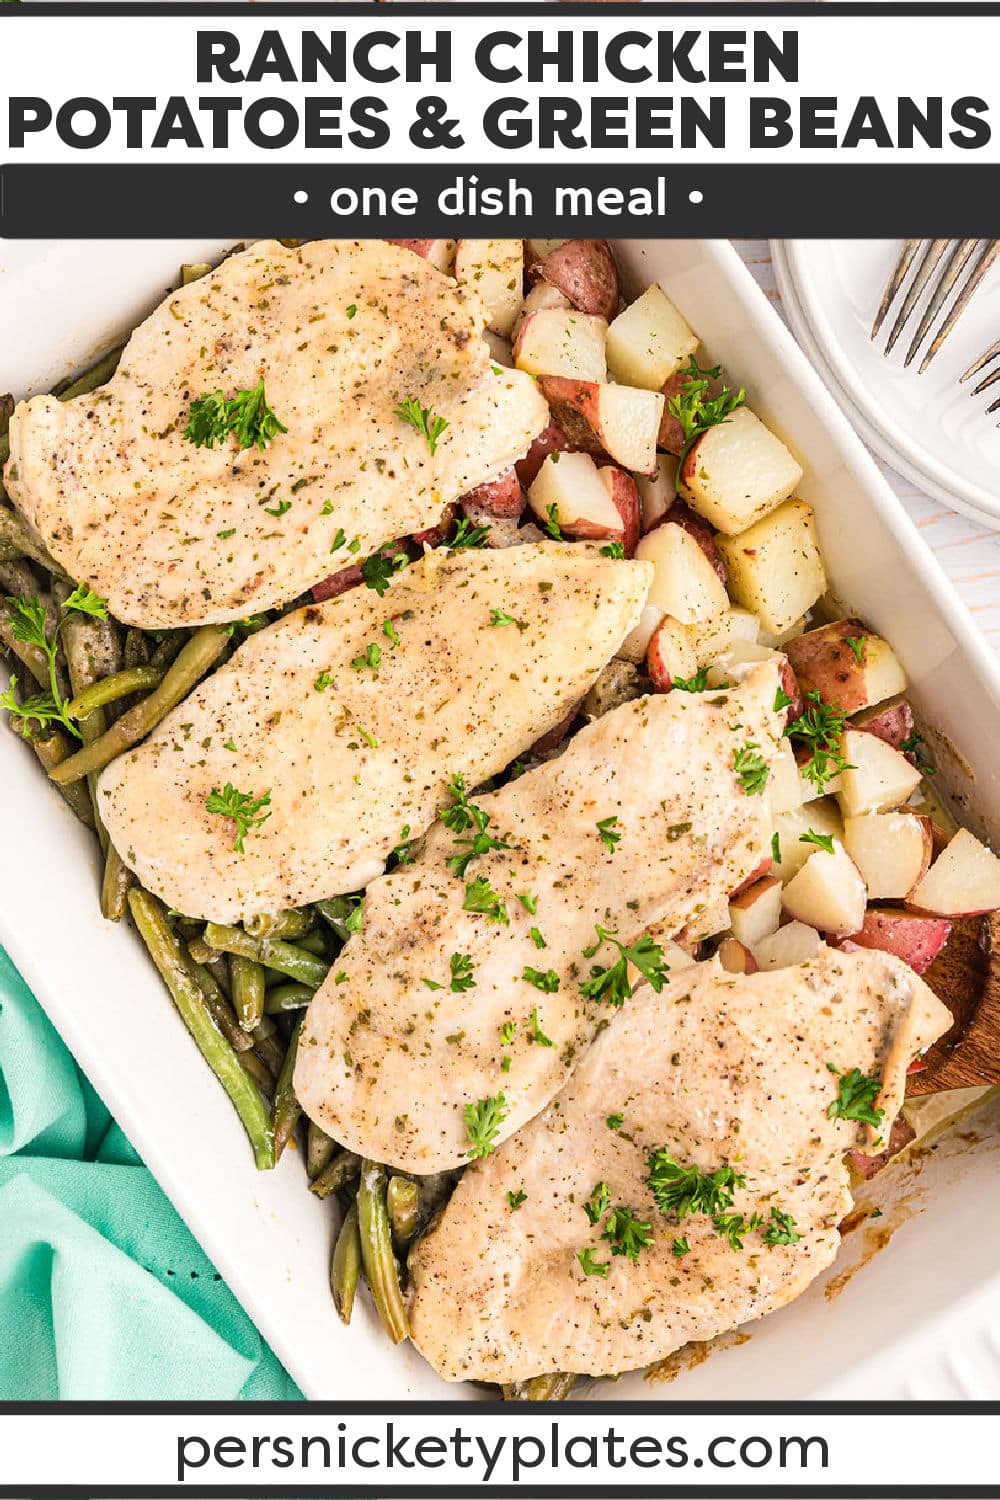 Juicy chicken breasts, tender seasoned potatoes, and crisp green beans are cooked together in one dish for a simple, wholesome, and easy weeknight dinner the whole family will love. This one dish ranch chicken veggie bake is comfort food that requires little prep and less clean-up making one-dish recipes like this one a huge hit! | www.persnicketyplates.com